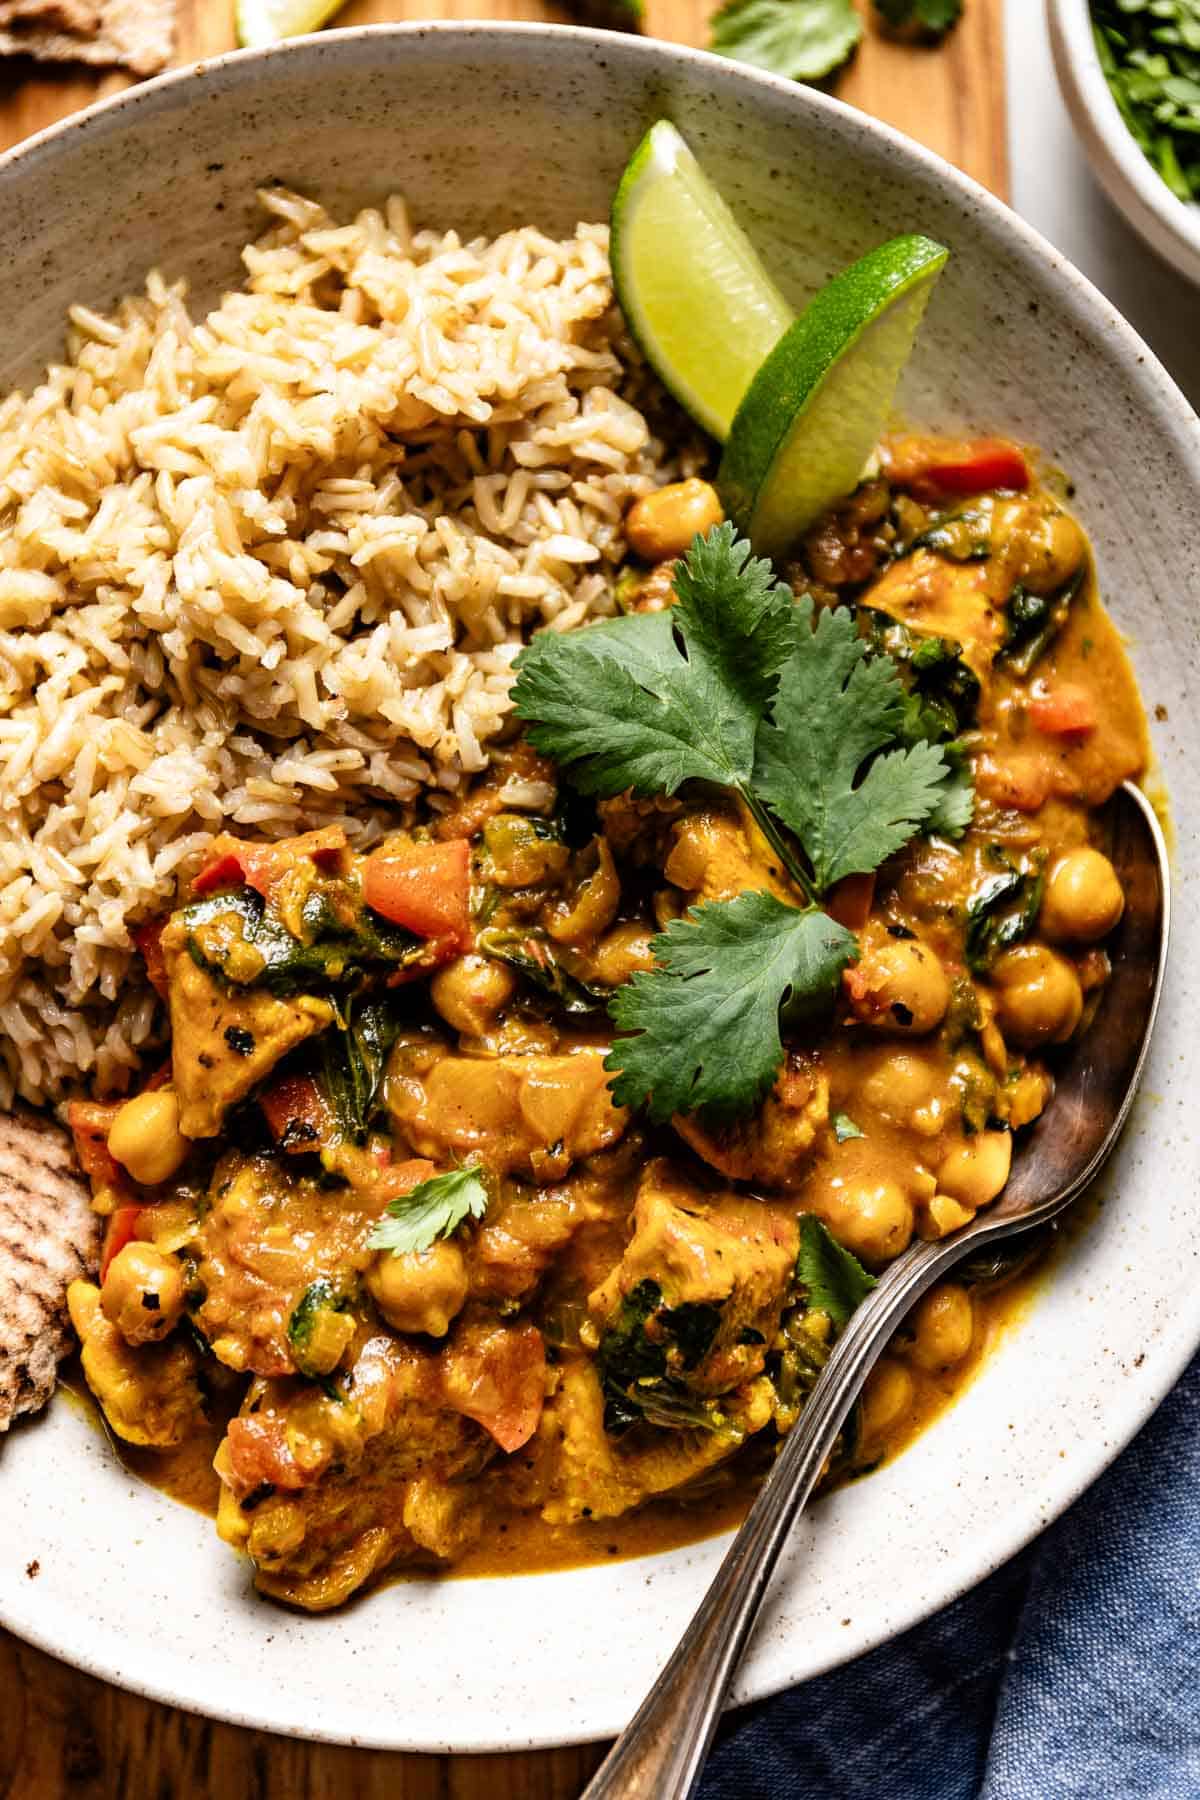 Chicken and chickpea curry in a bowl served with rice and lime wedges on the side.